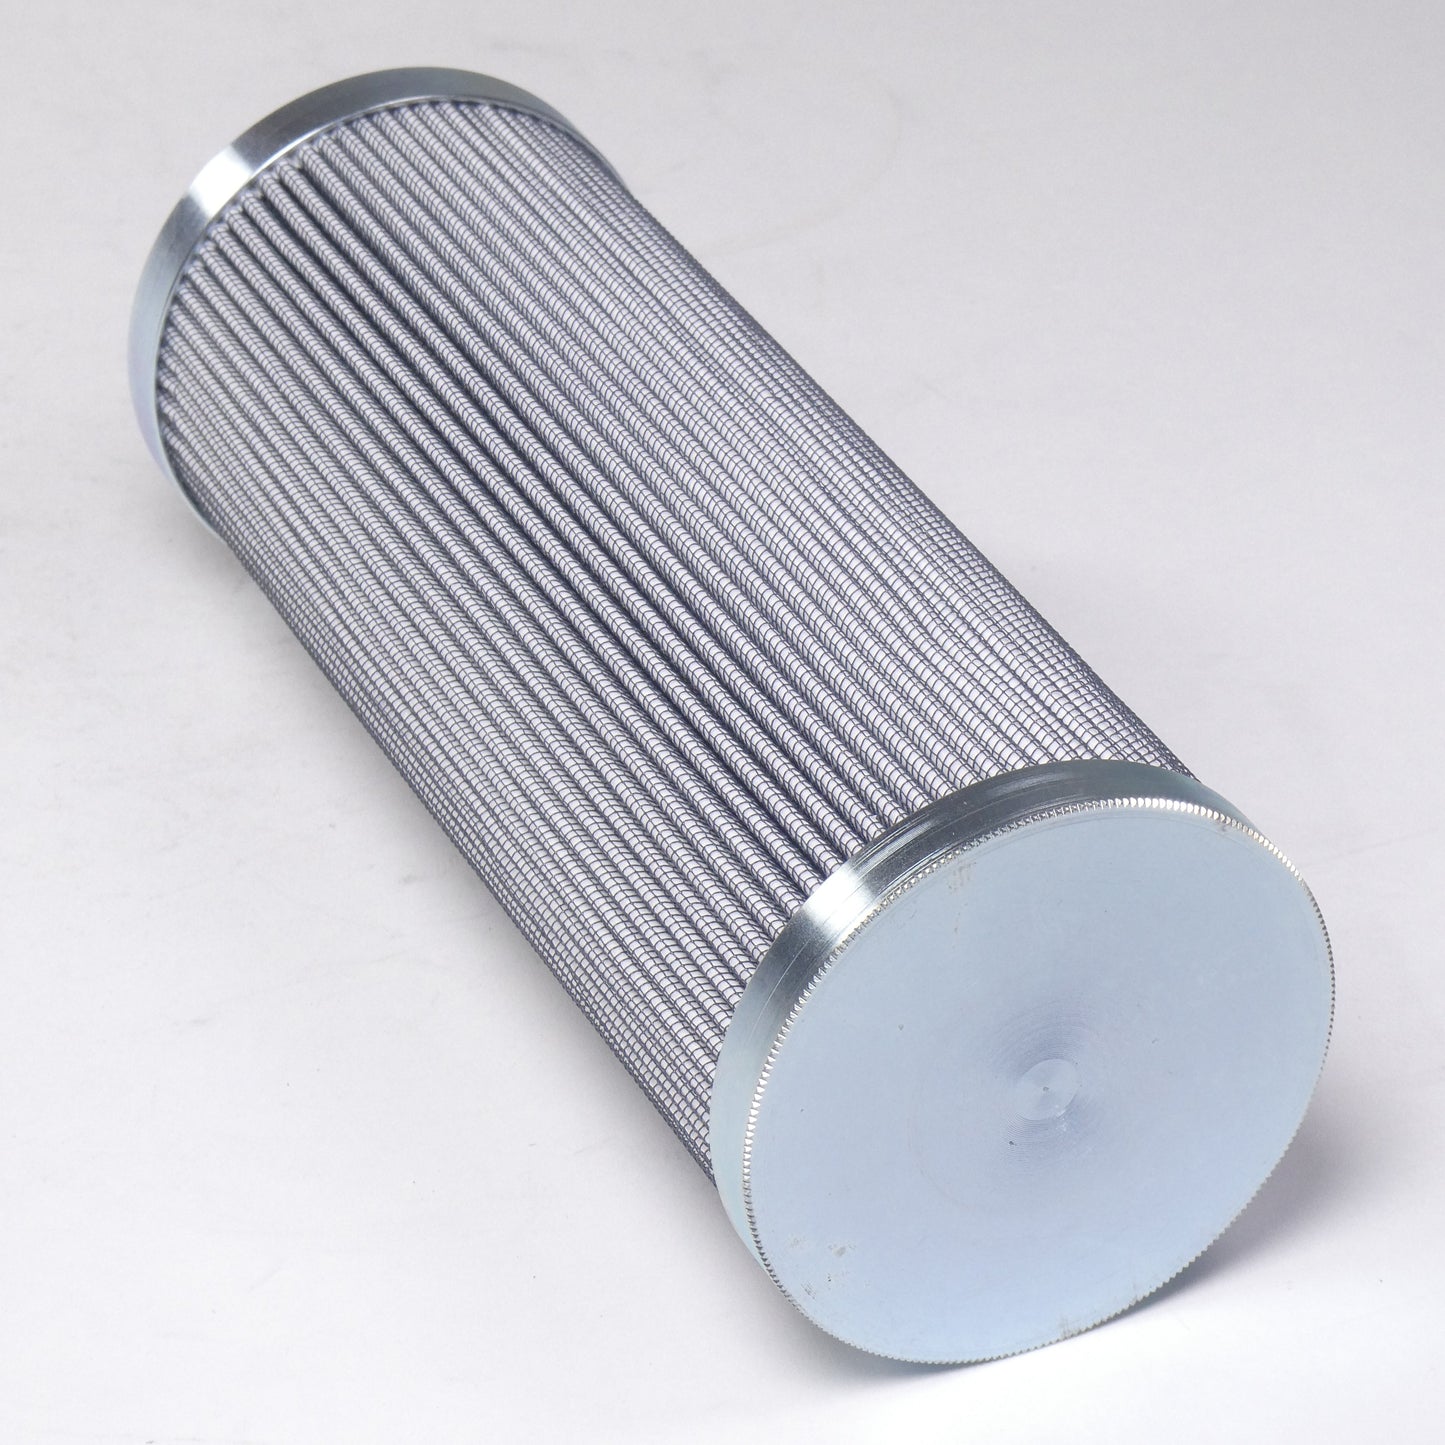 Hydrafil Replacement Filter Element for Pall HC9601FDP8H